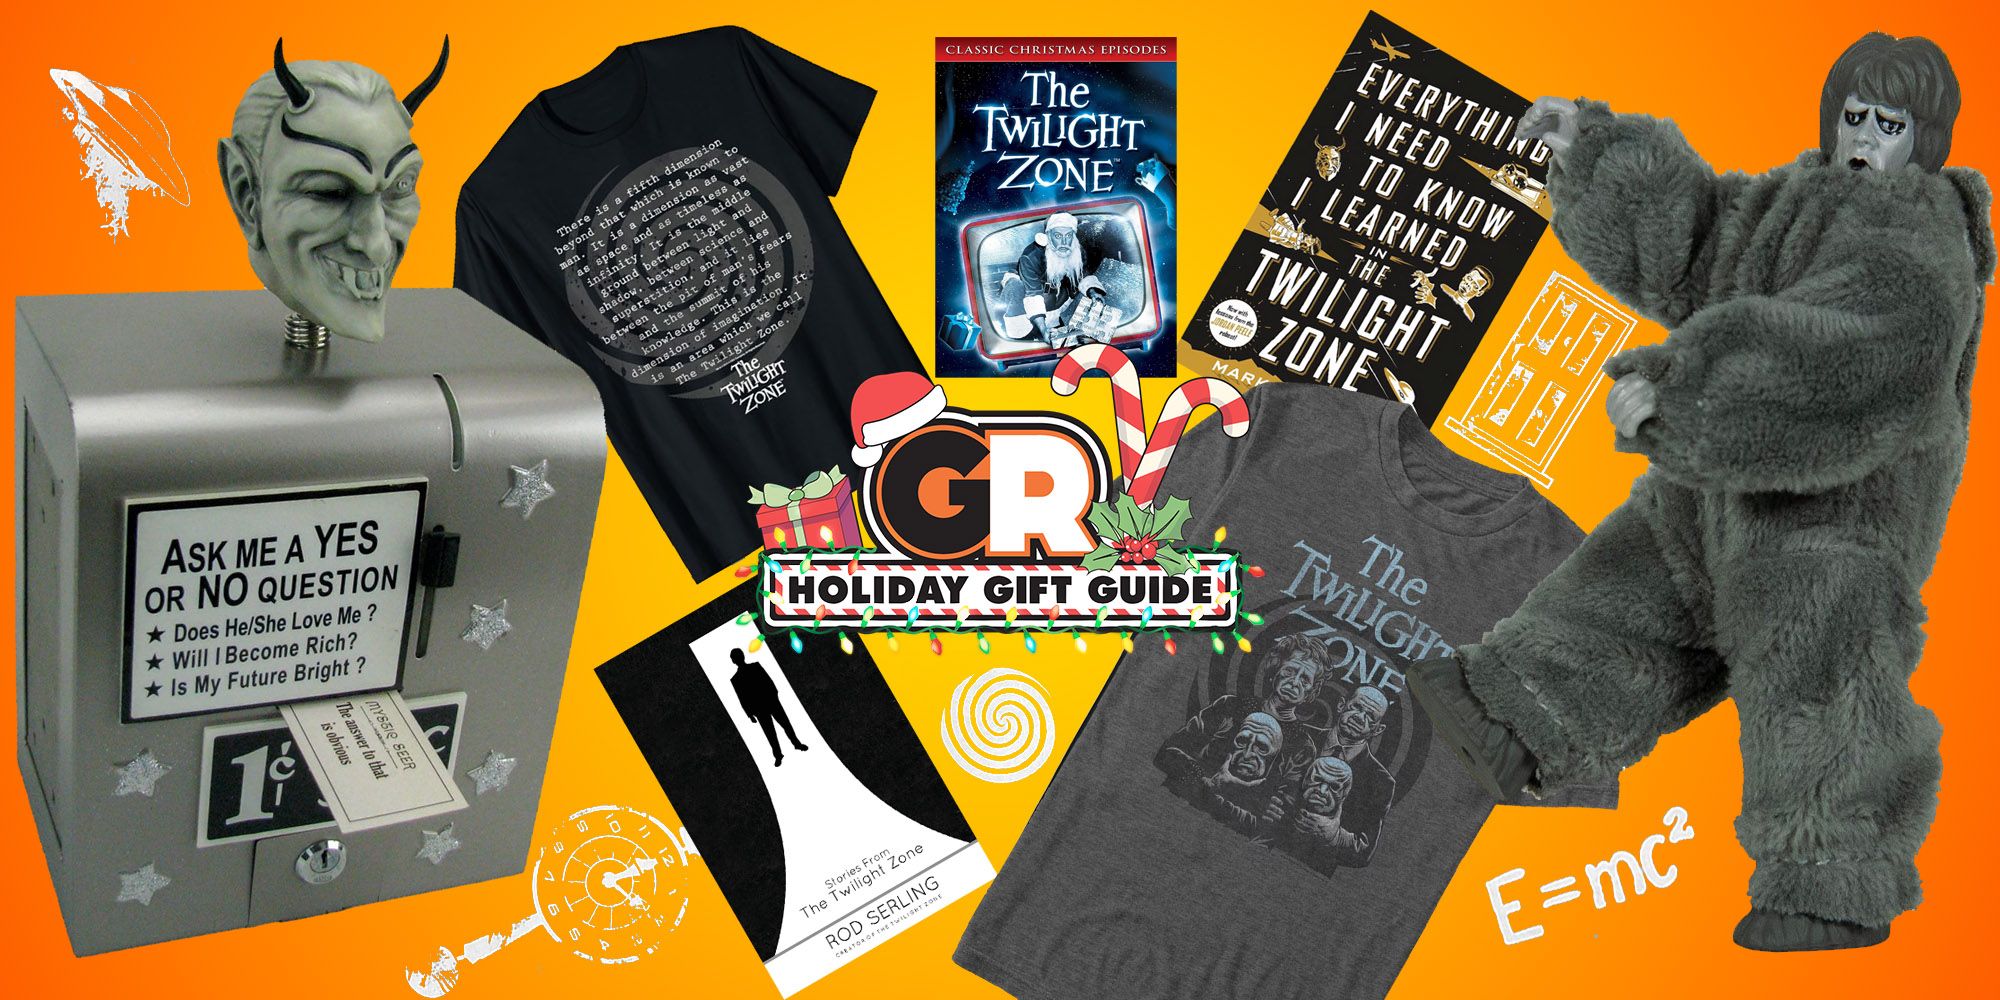 The Twilight Zone Merchandise and Collectible Gift Guide